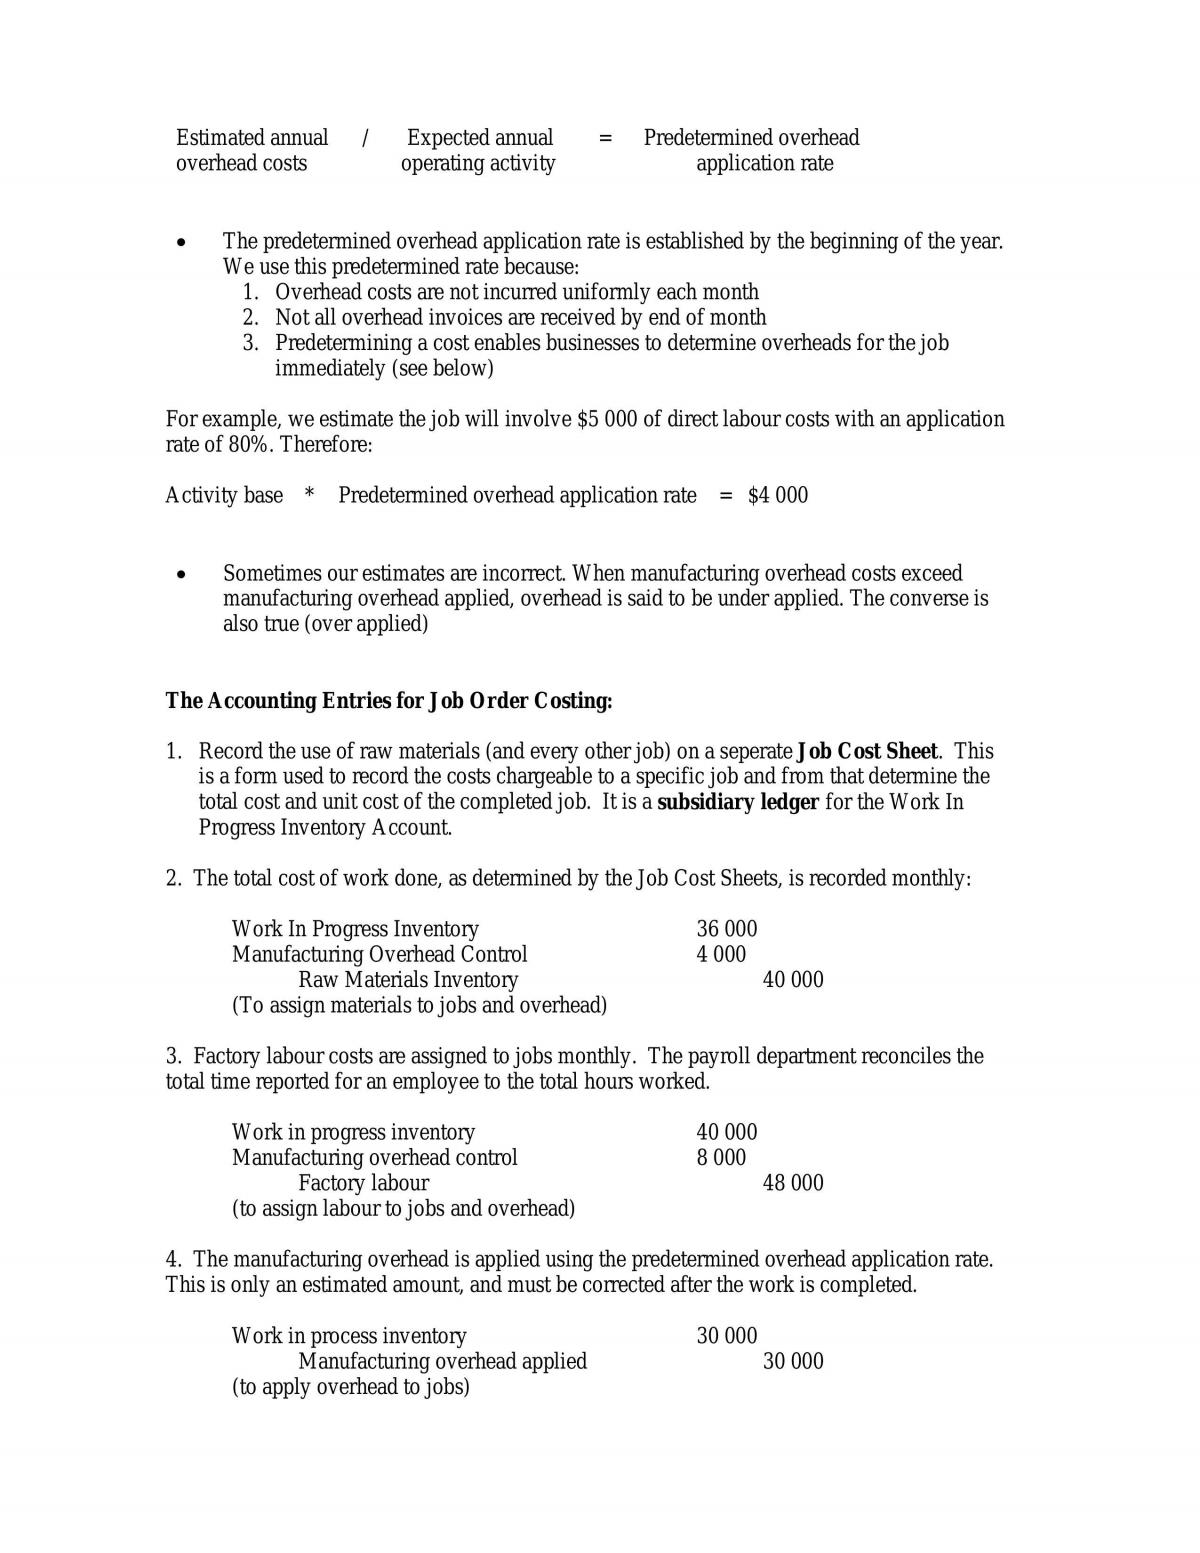 Accounting 1B Complete Notes - Page 30